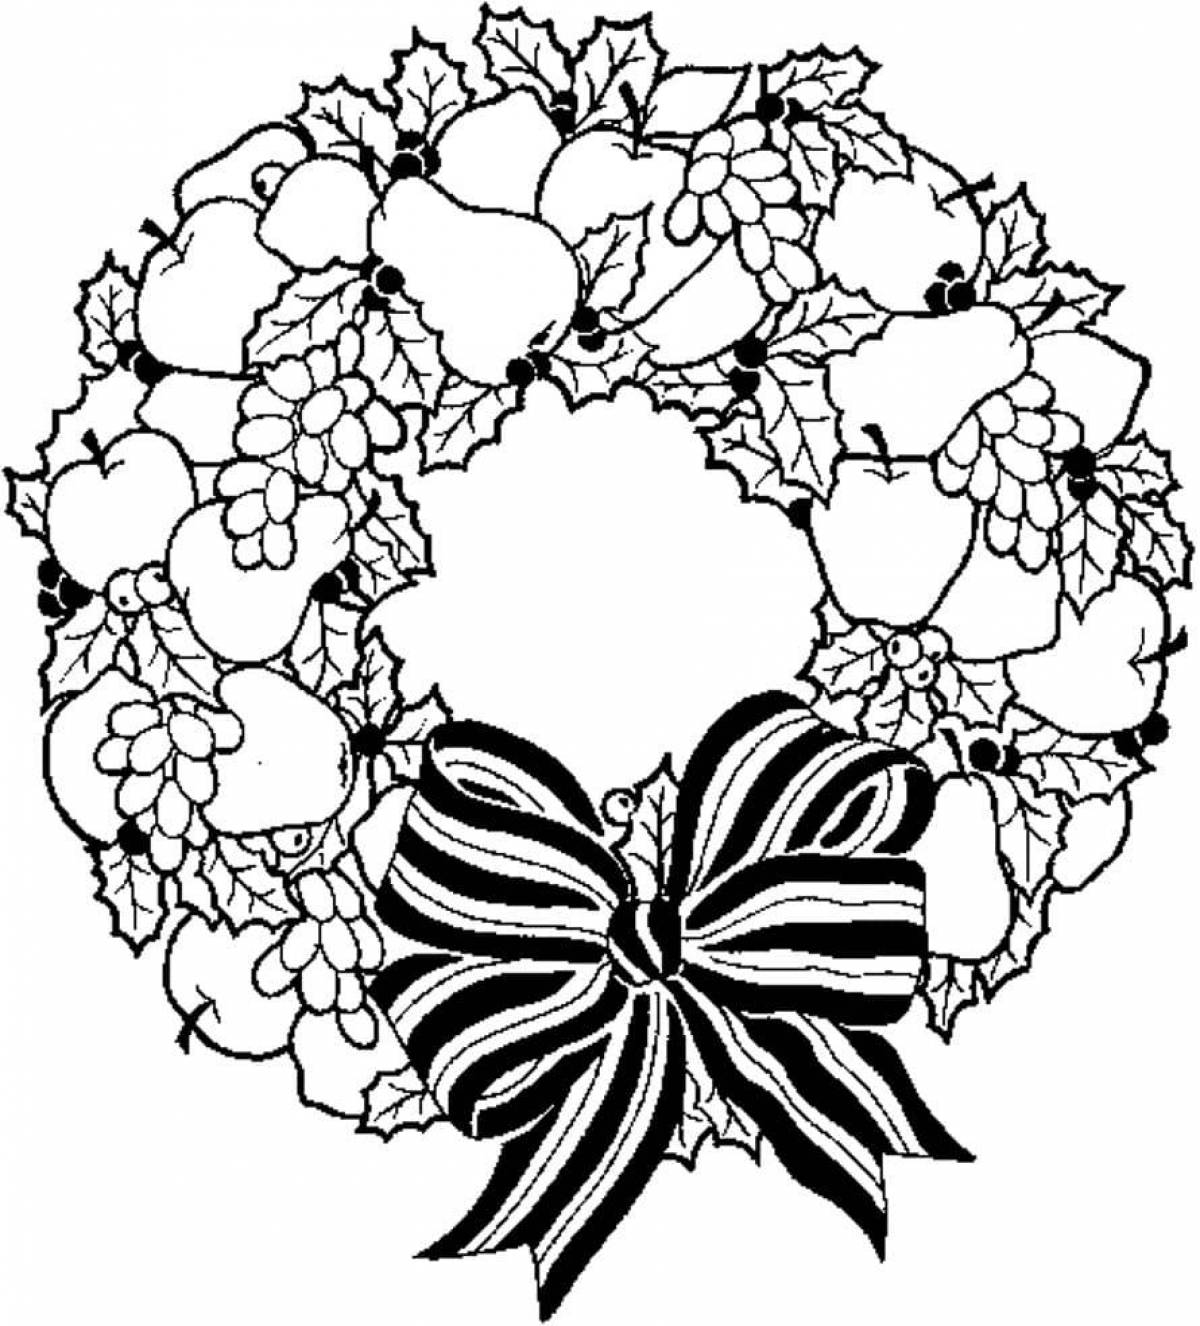 Glitter Christmas wreath coloring page